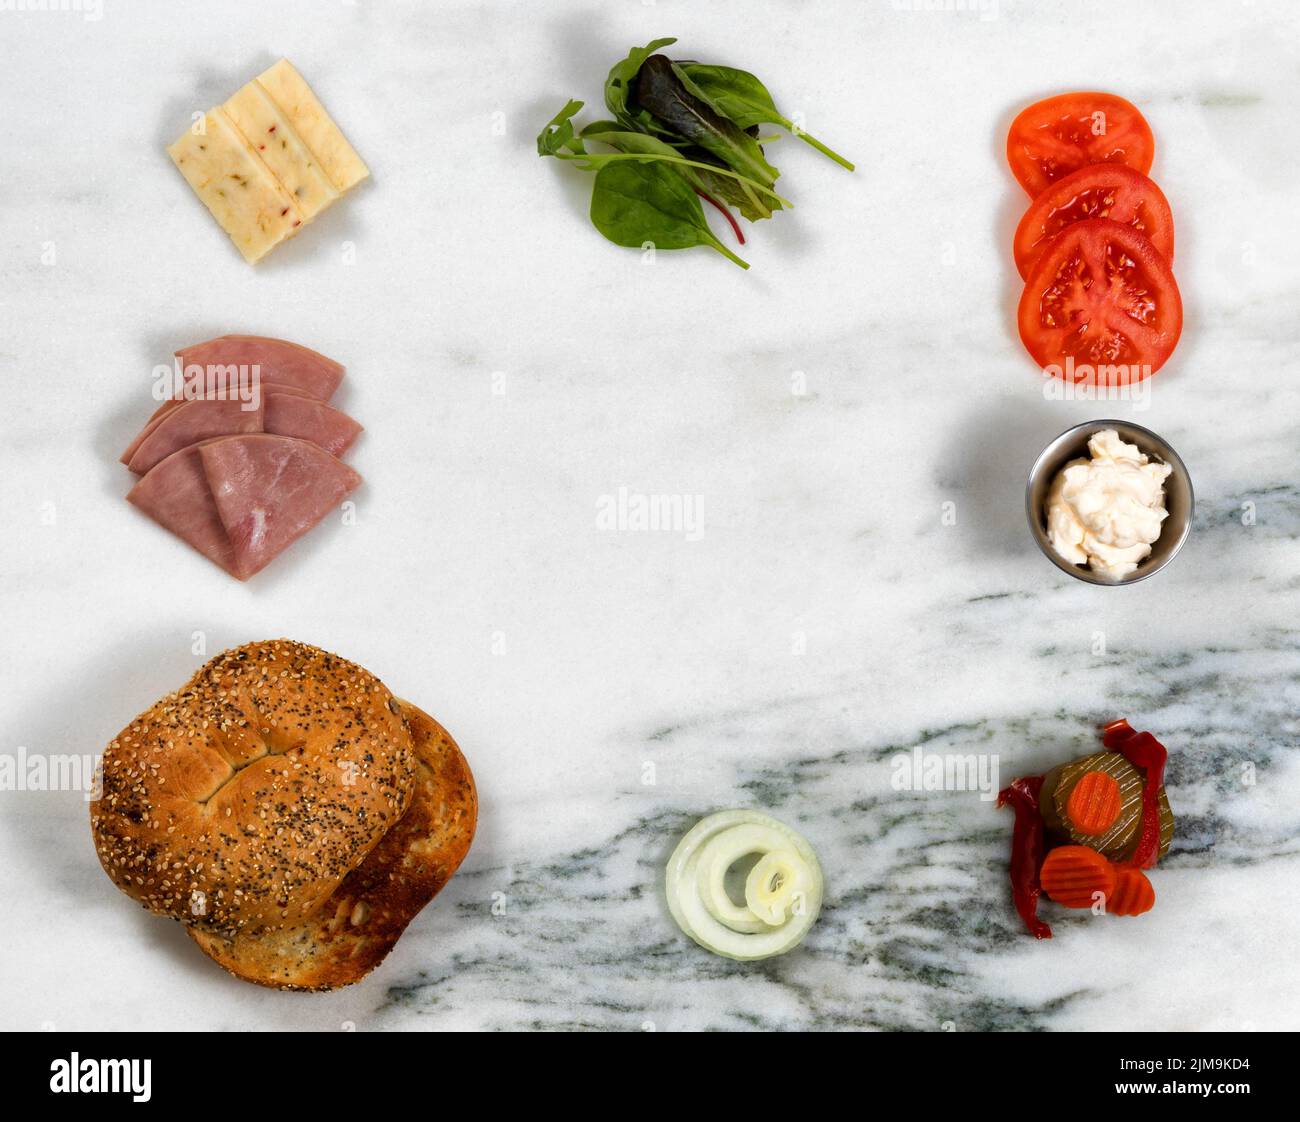 Sandwich ready to be made with fresh ingredients on white marble stone background Stock Photo